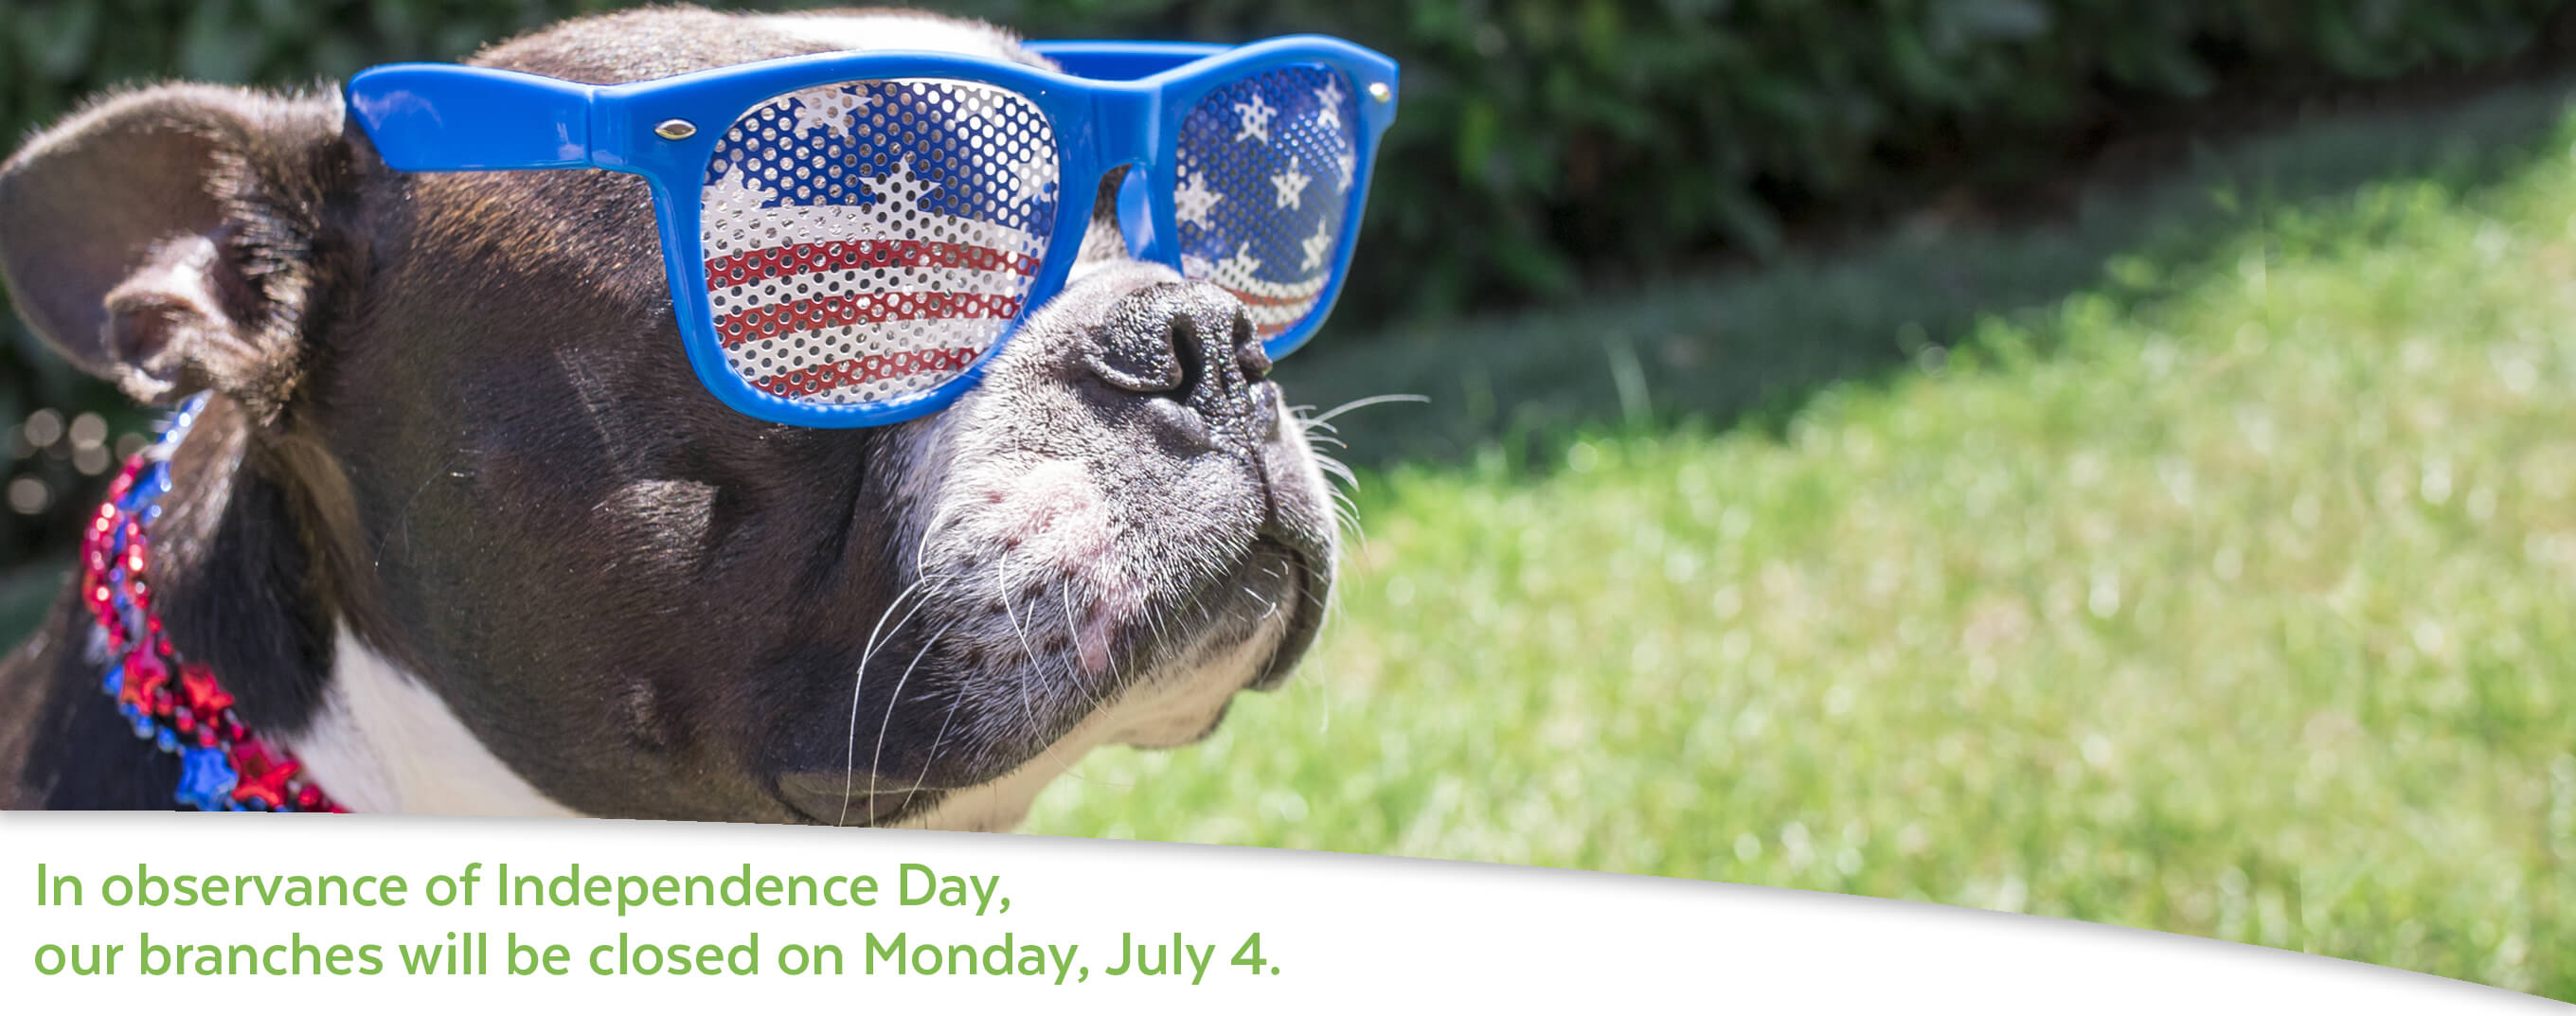 In observance of Independence Day, our branches will be closed on Monday, July 4